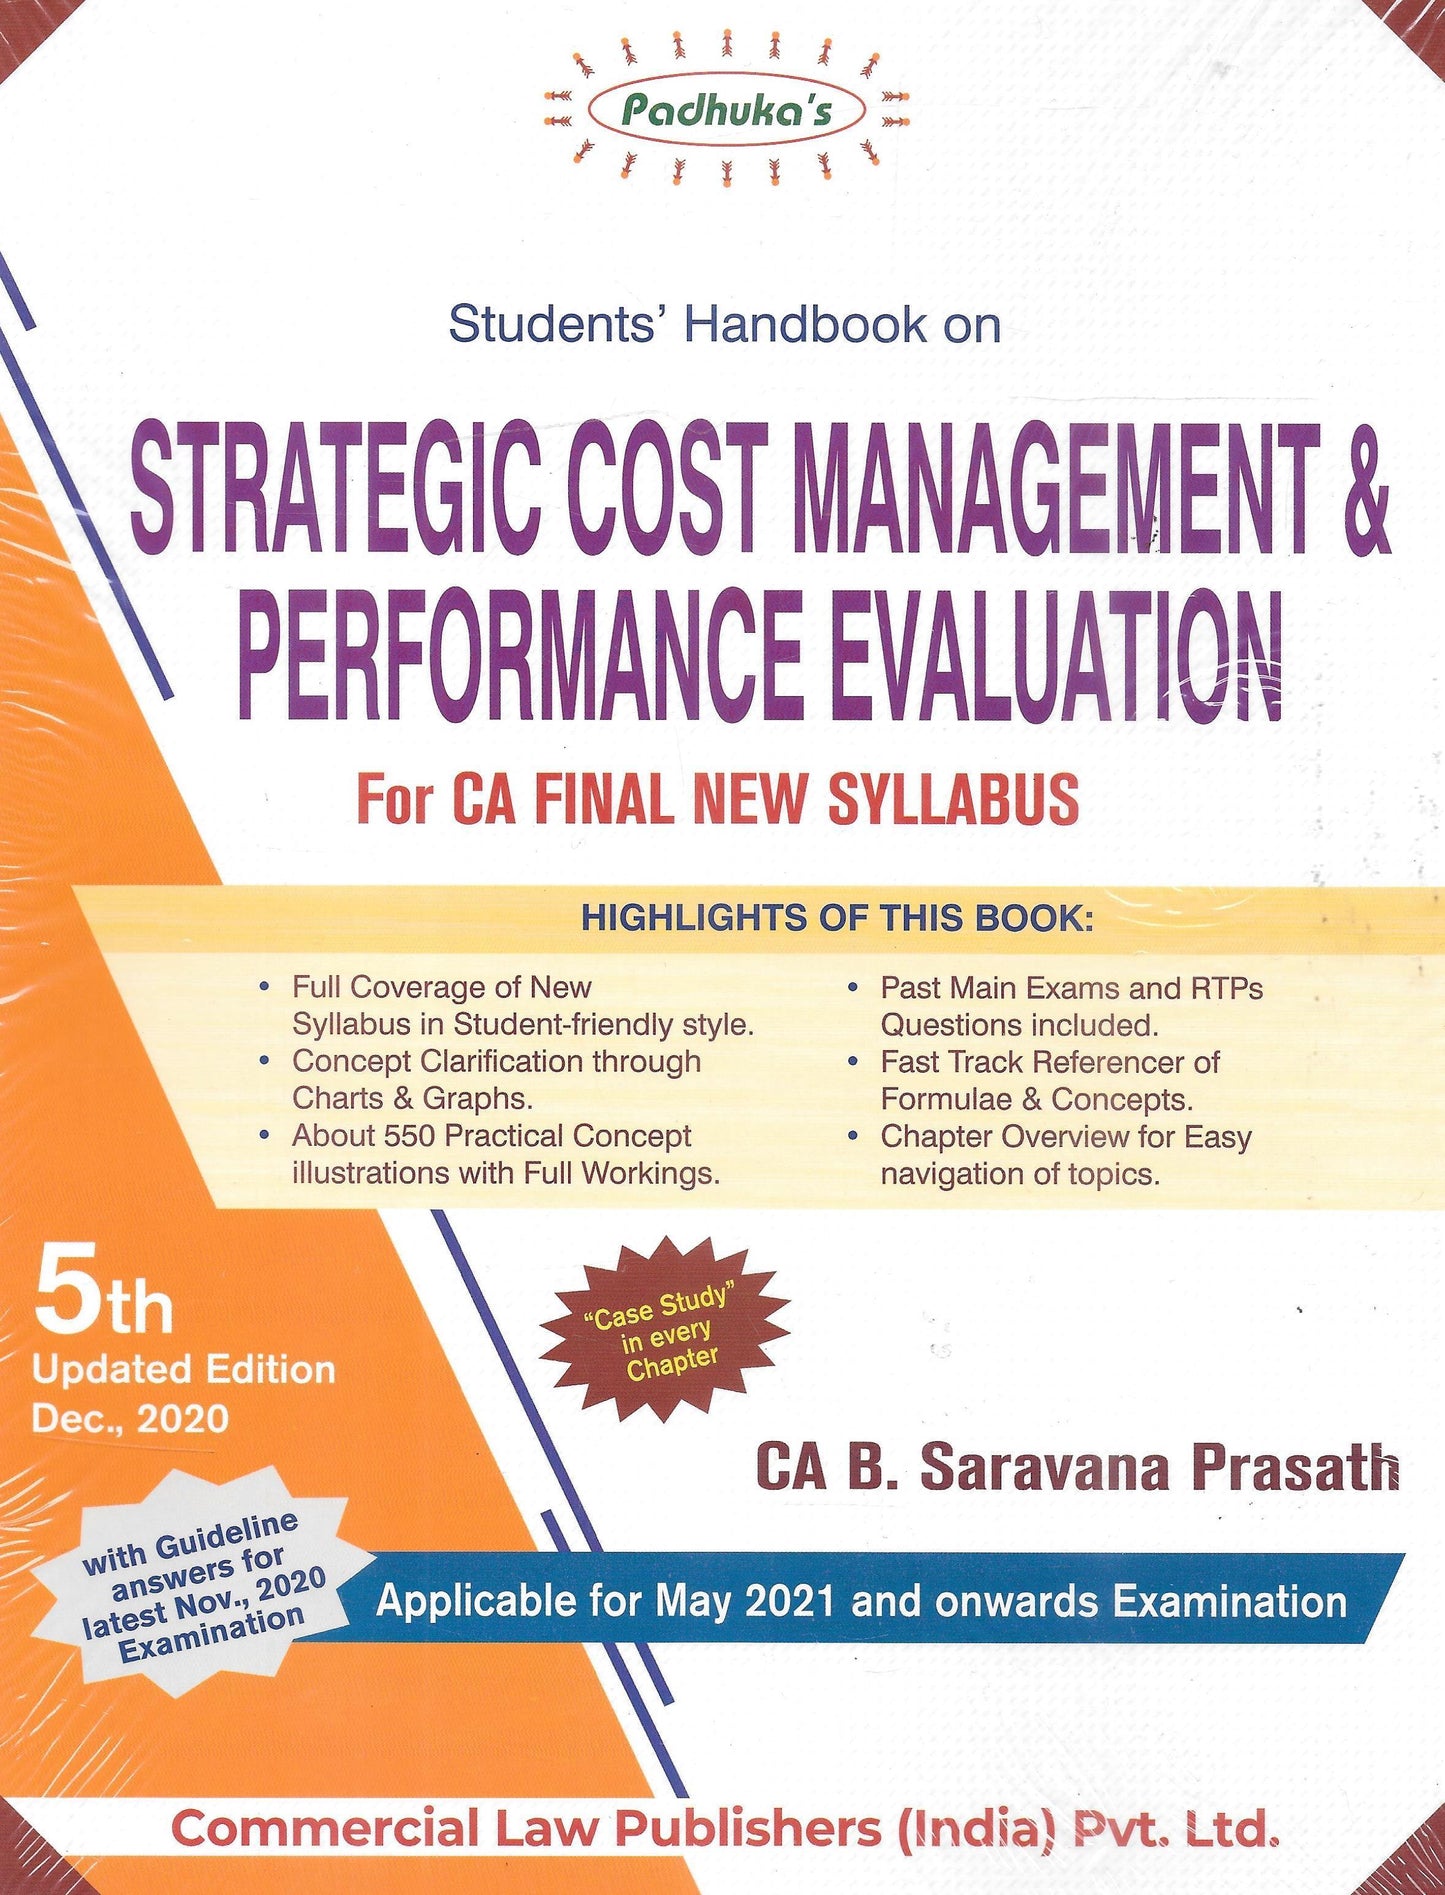 Strategic Cost Management & Performance Evaluation For CA Final New Syllabus - M&J Services